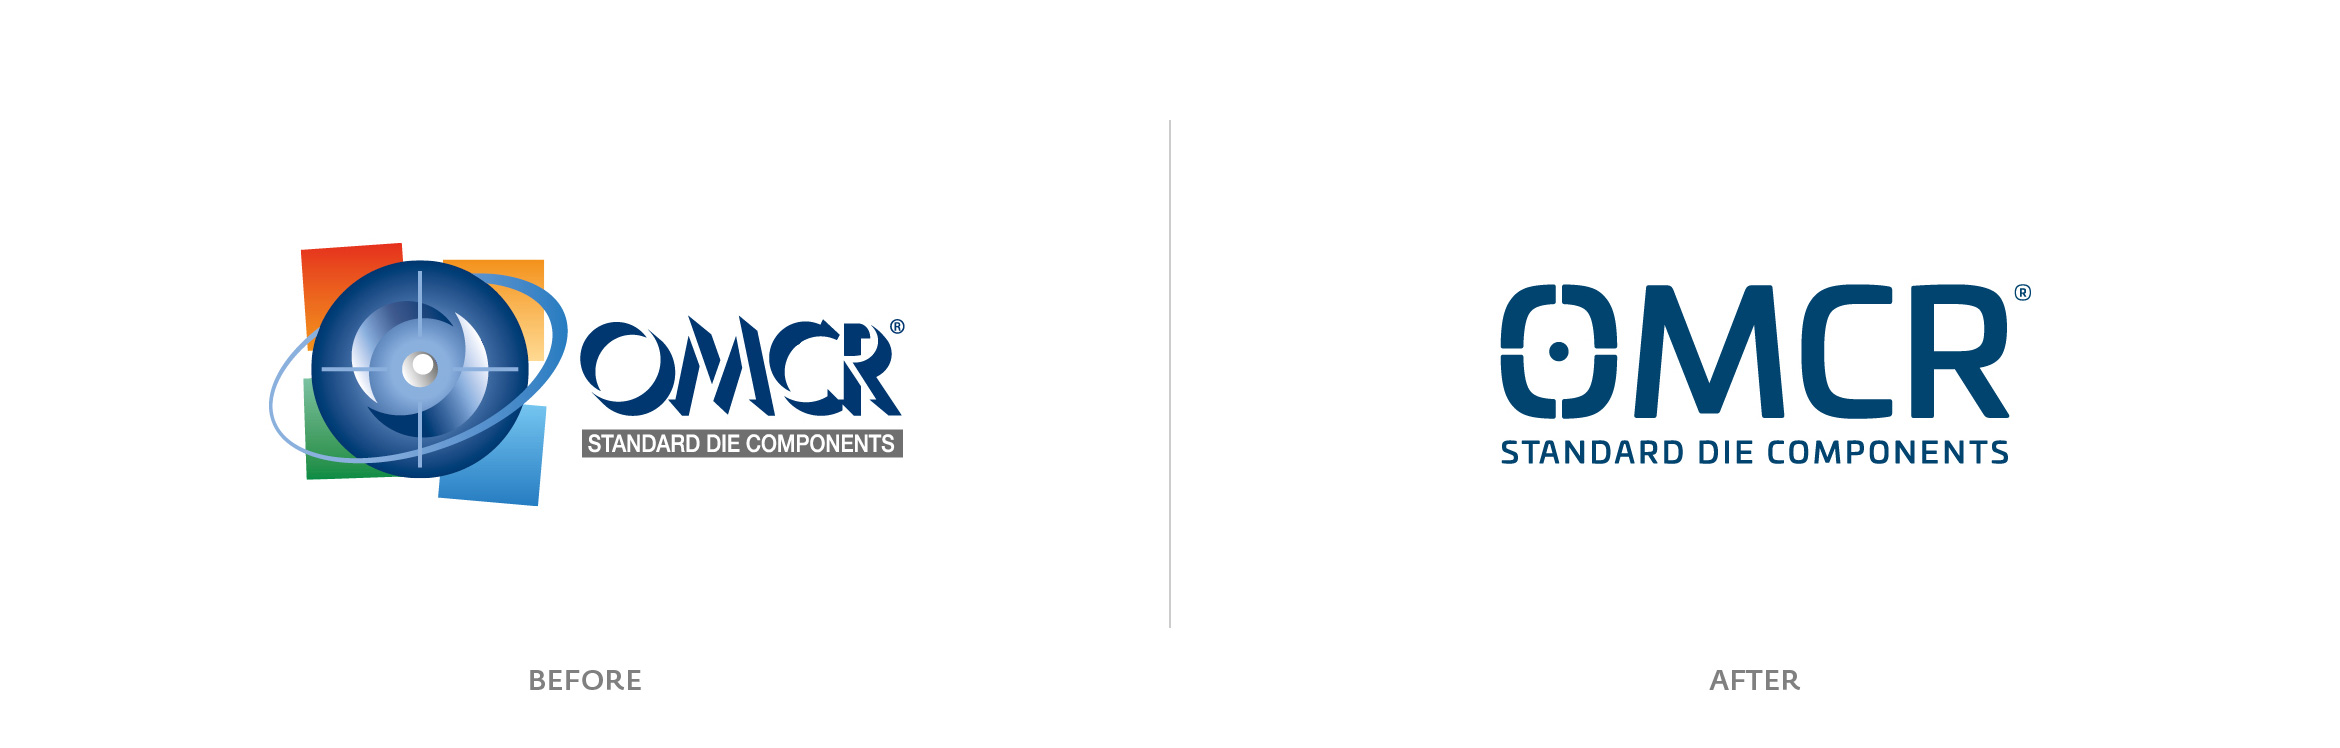 Logo before after